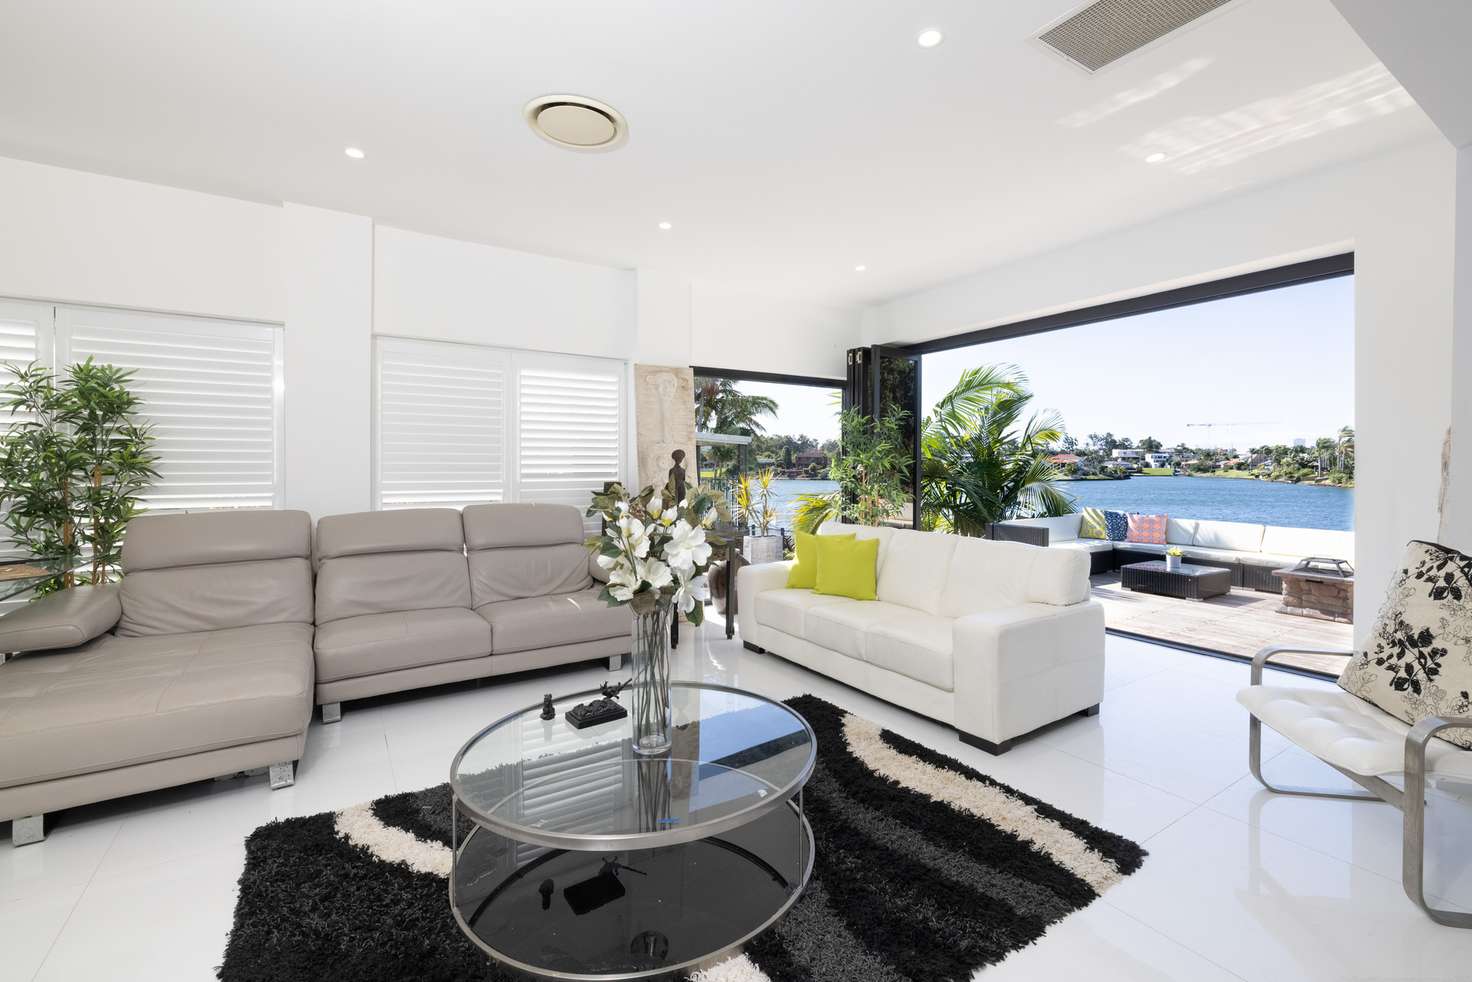 Main view of Homely house listing, 11 Cabana Boulevard, Benowa Waters QLD 4217